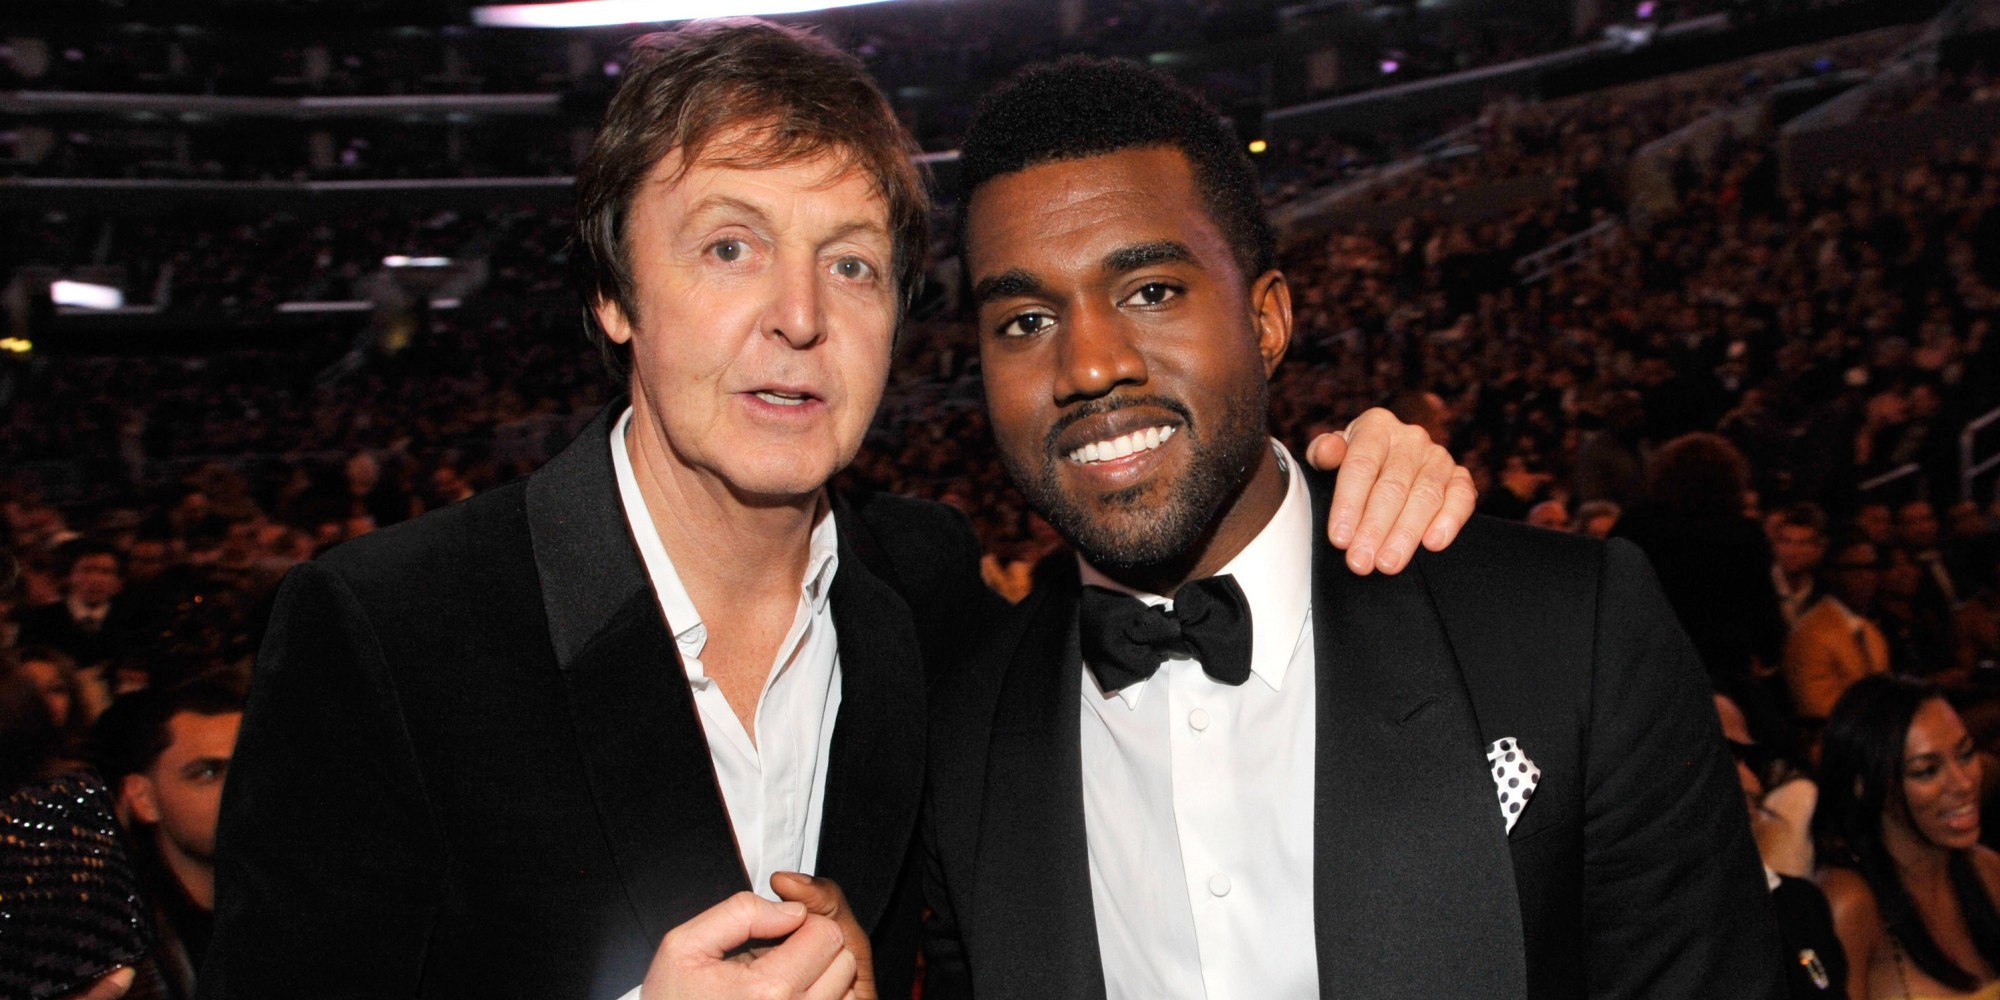 Paul McCartney and Kanye West, or a long-dead Beatle seen with a shape-shifting member of the Illuminati? Photo: SCMP